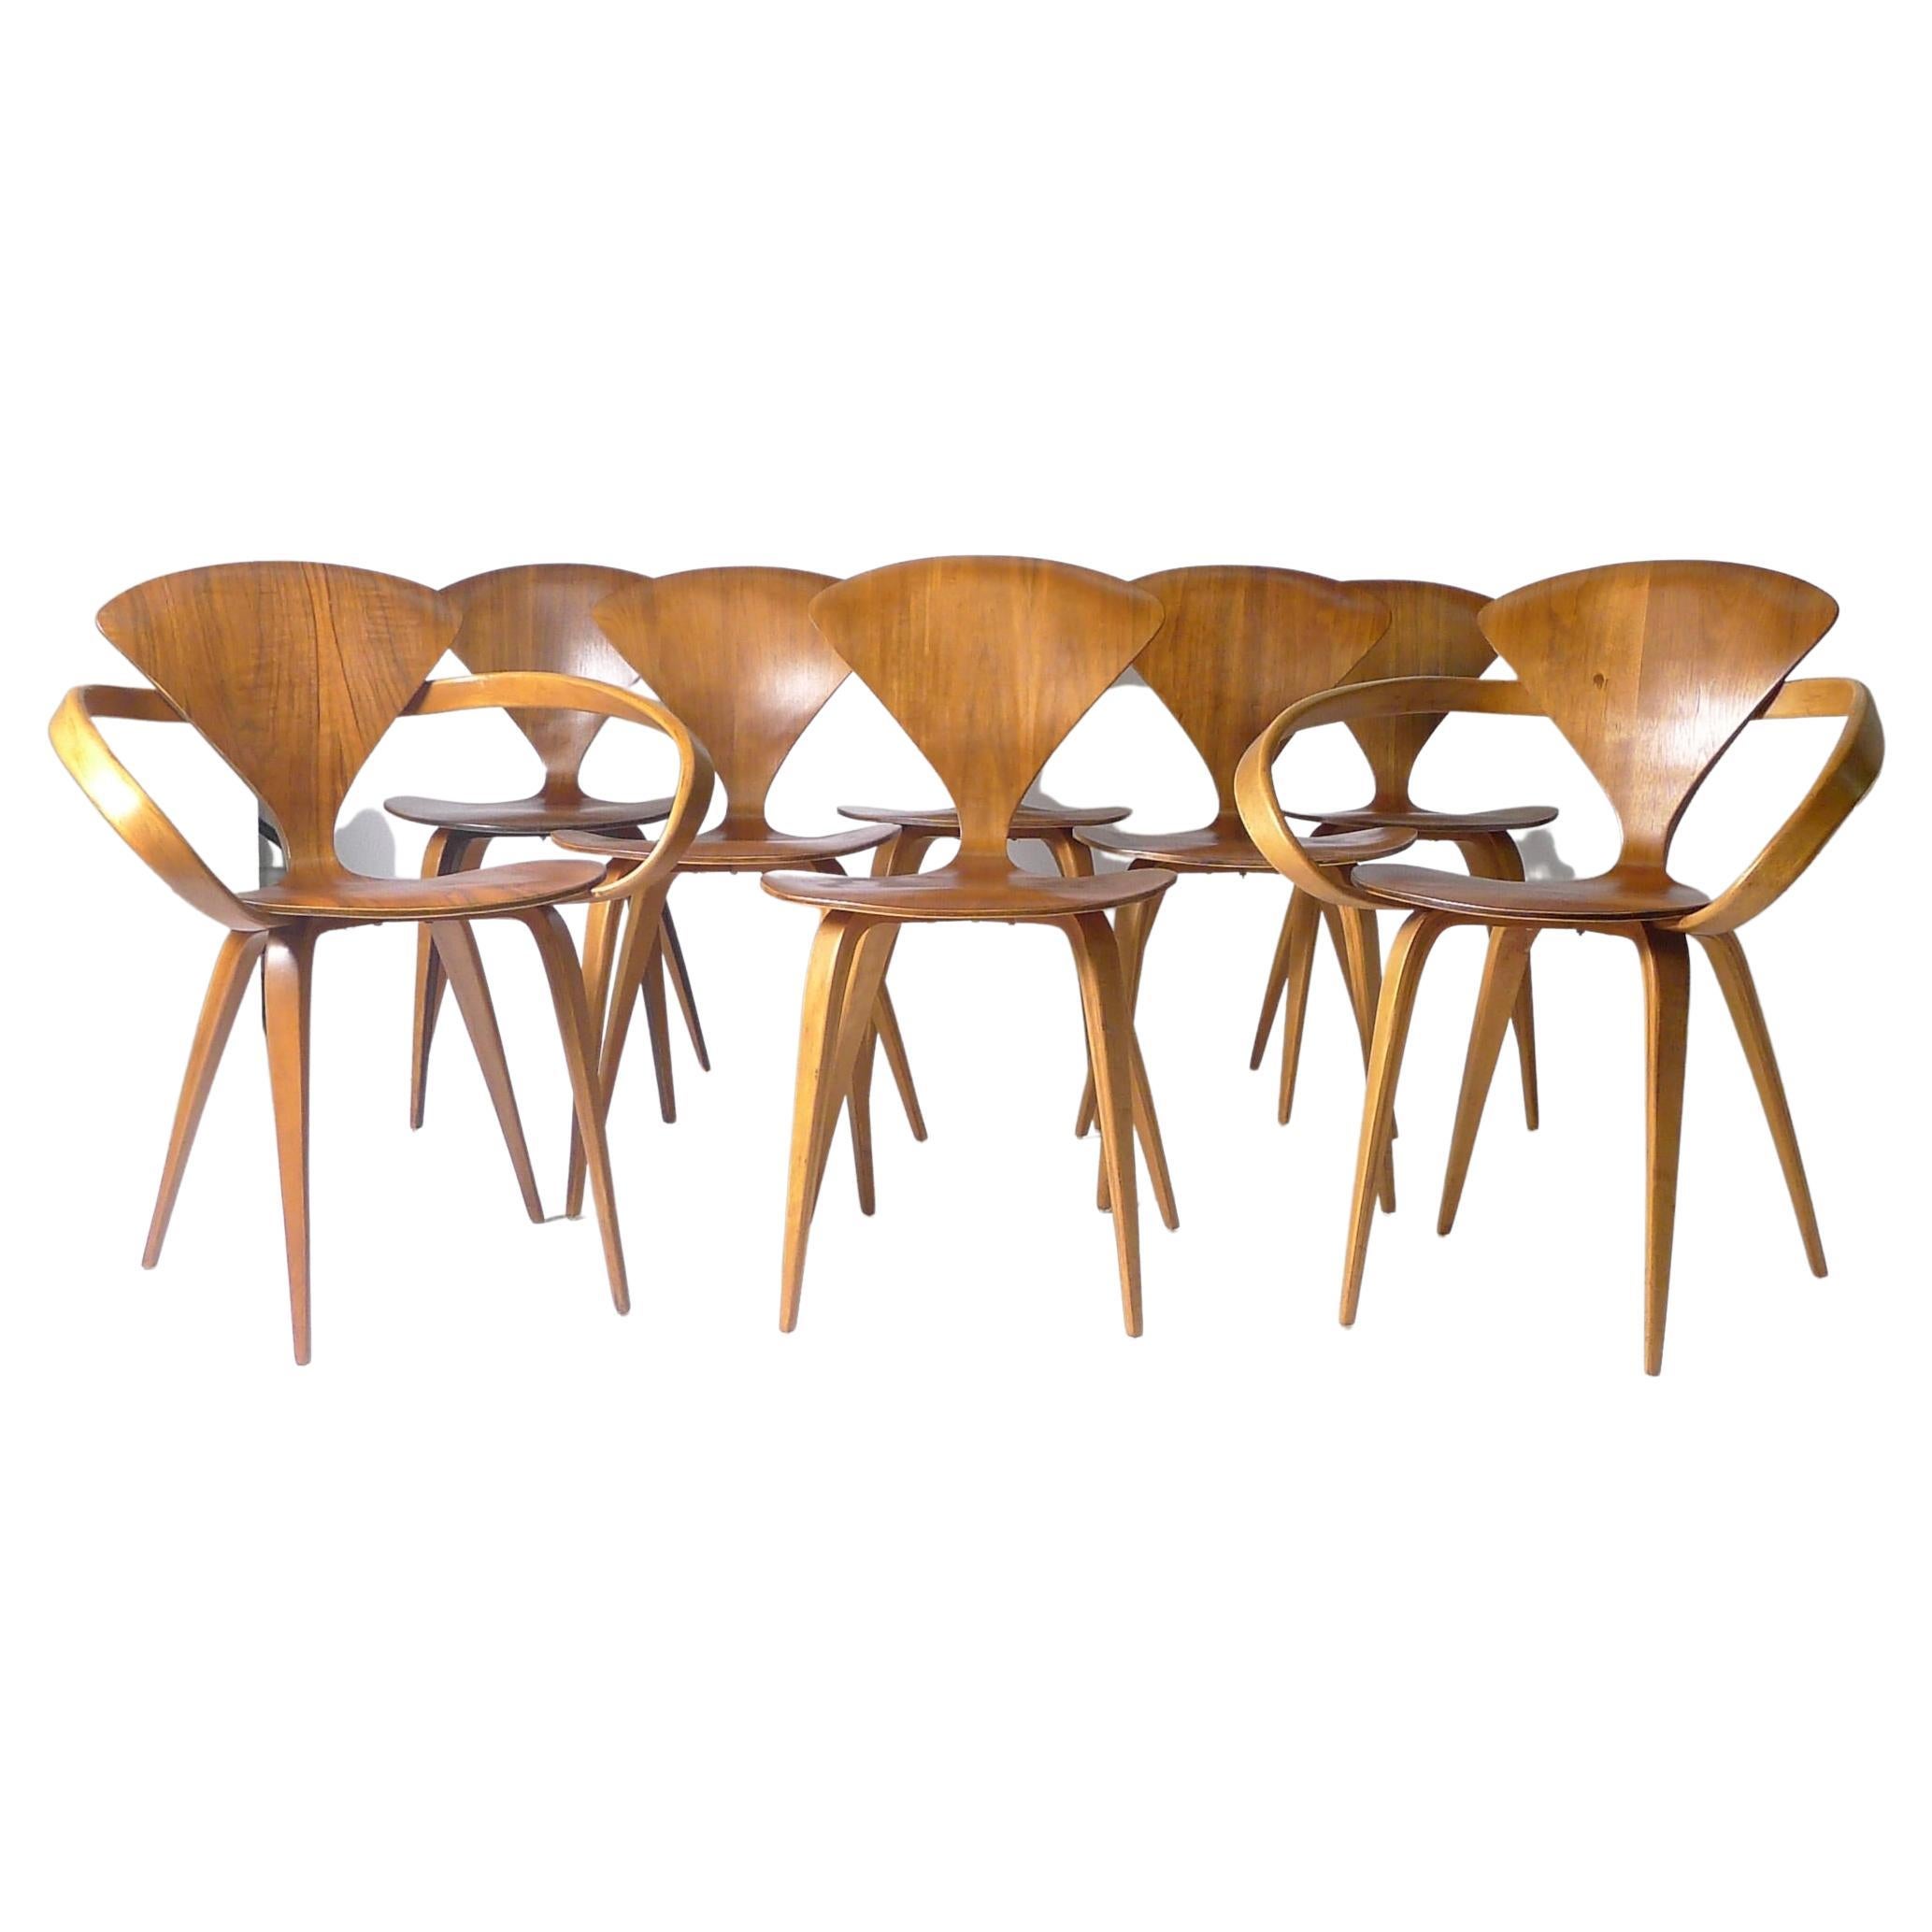 Norman Cherner for Plycraft, Set of 8 Original Chairs with Labels, Walnut Veneer For Sale